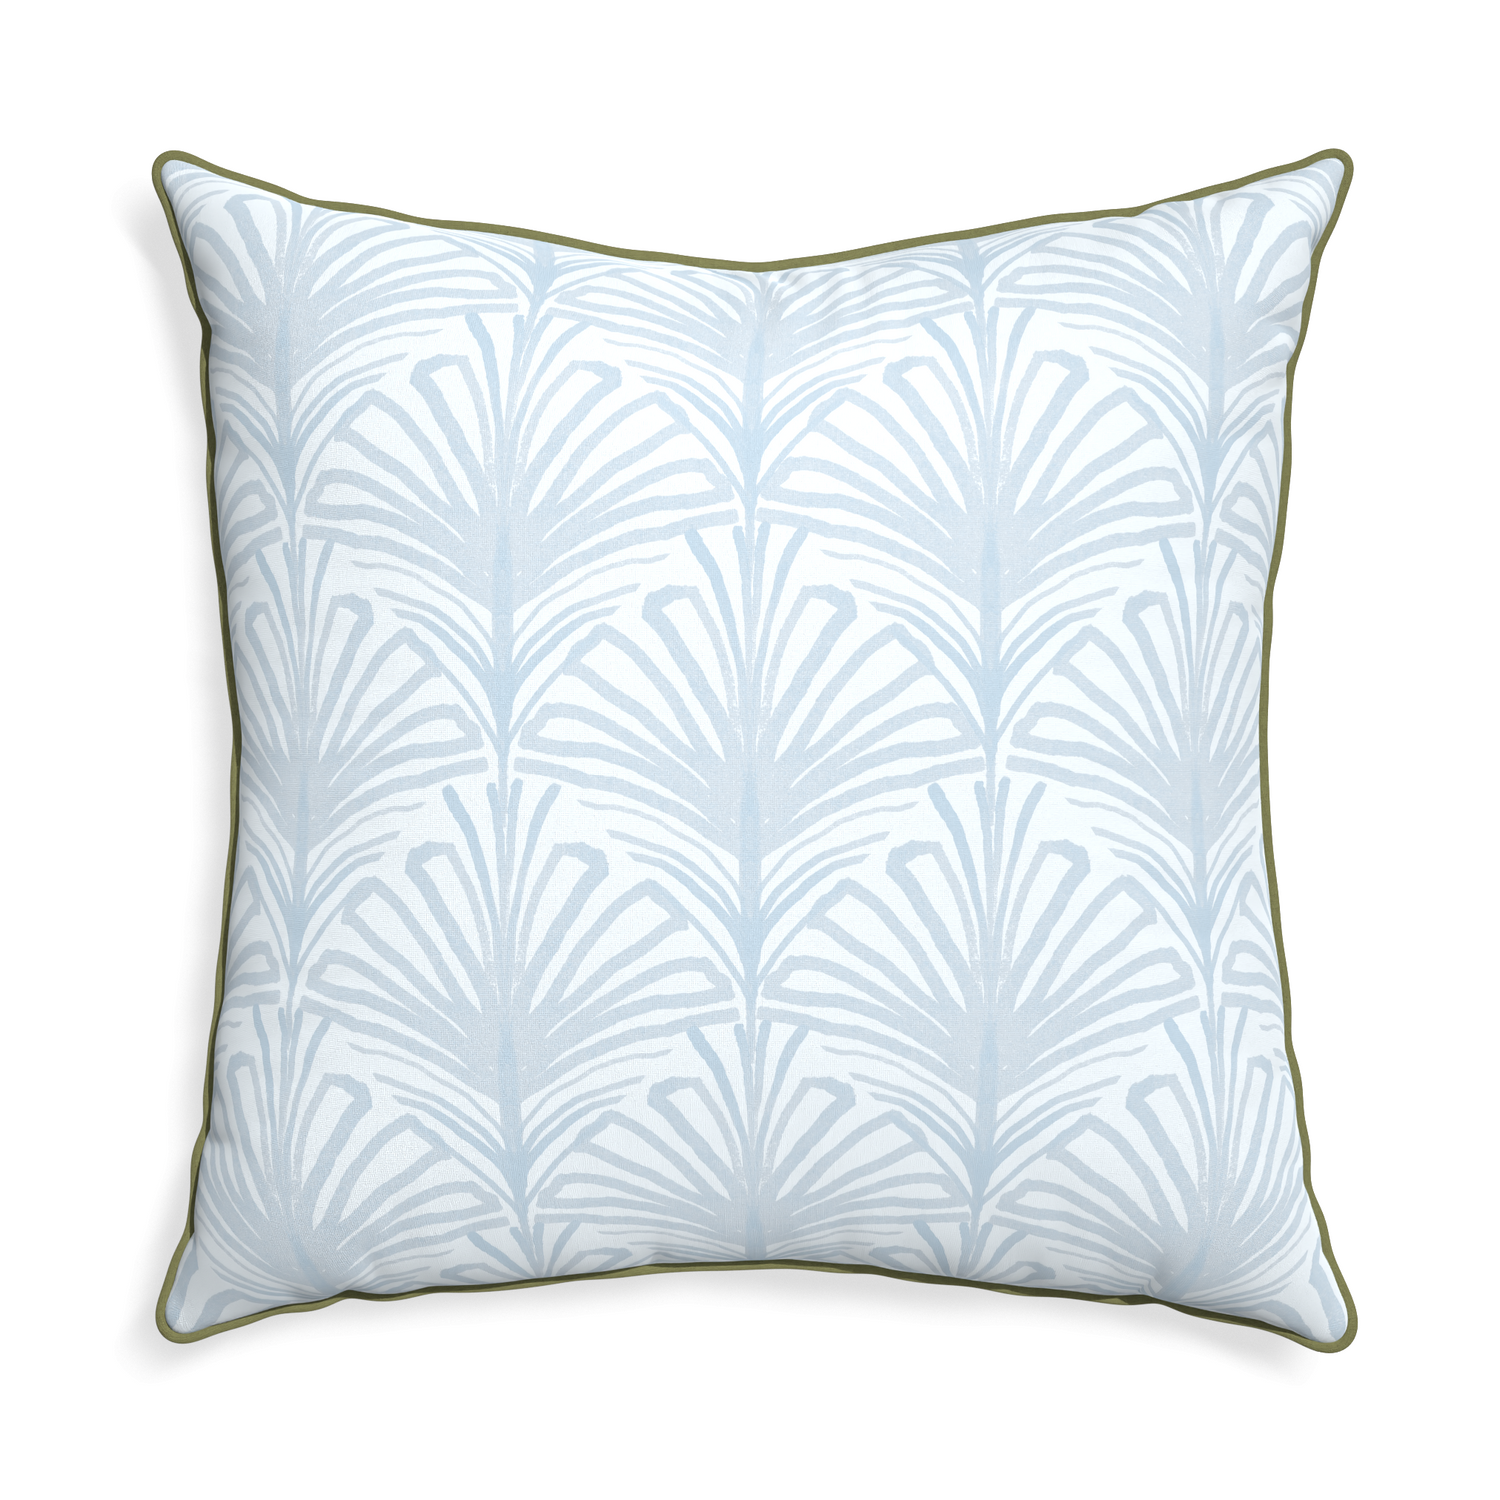 Euro-sham suzy sky custom pillow with moss piping on white background